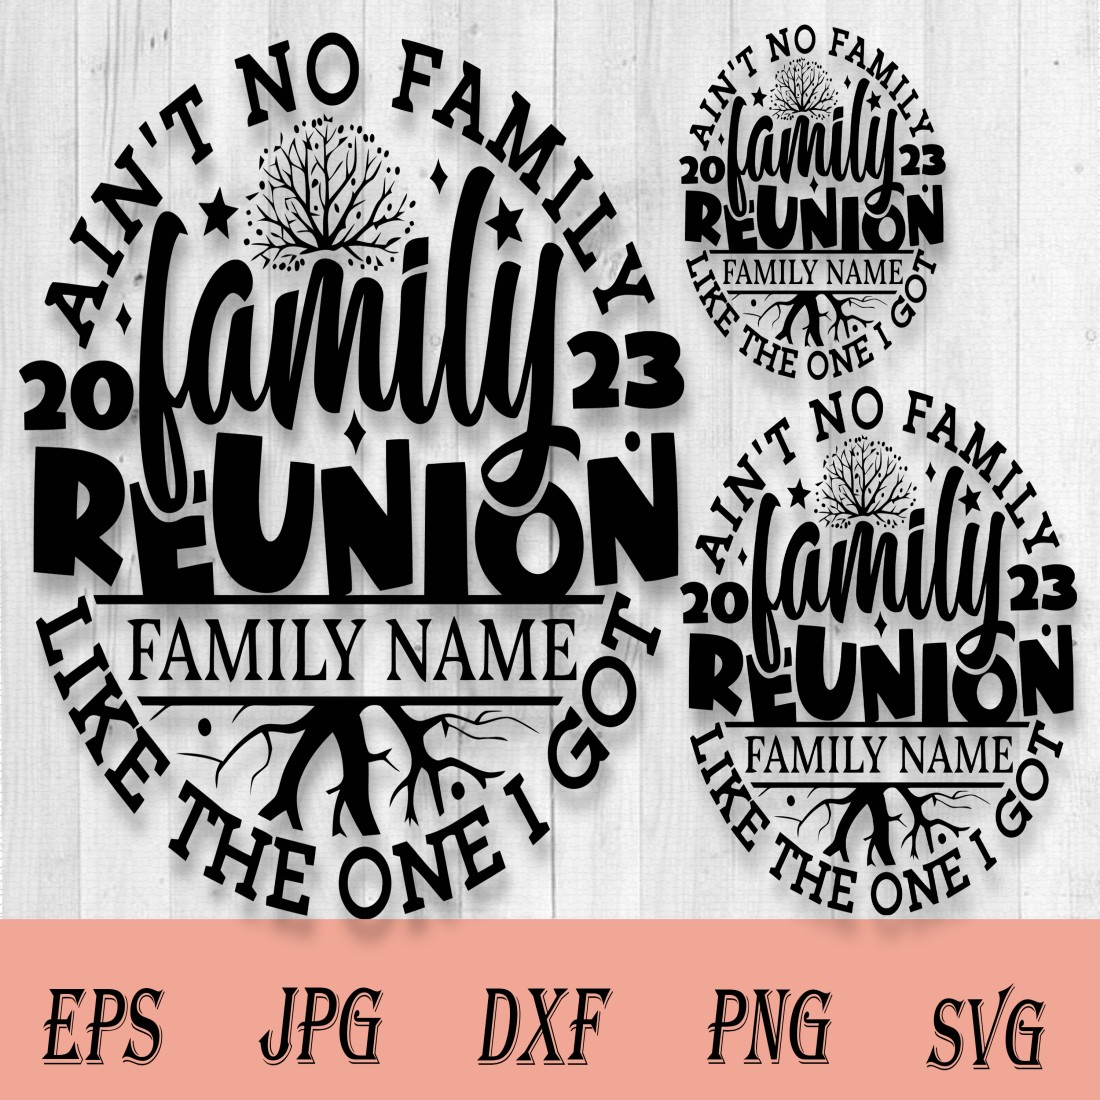 Family Reunion Tree SVG, Our Roots Run Deep SVG,Family Reunion SVG,Family Reunion Shirt Design,Family Reunion Tree 2023, Reunion Tree 2024 cover image.